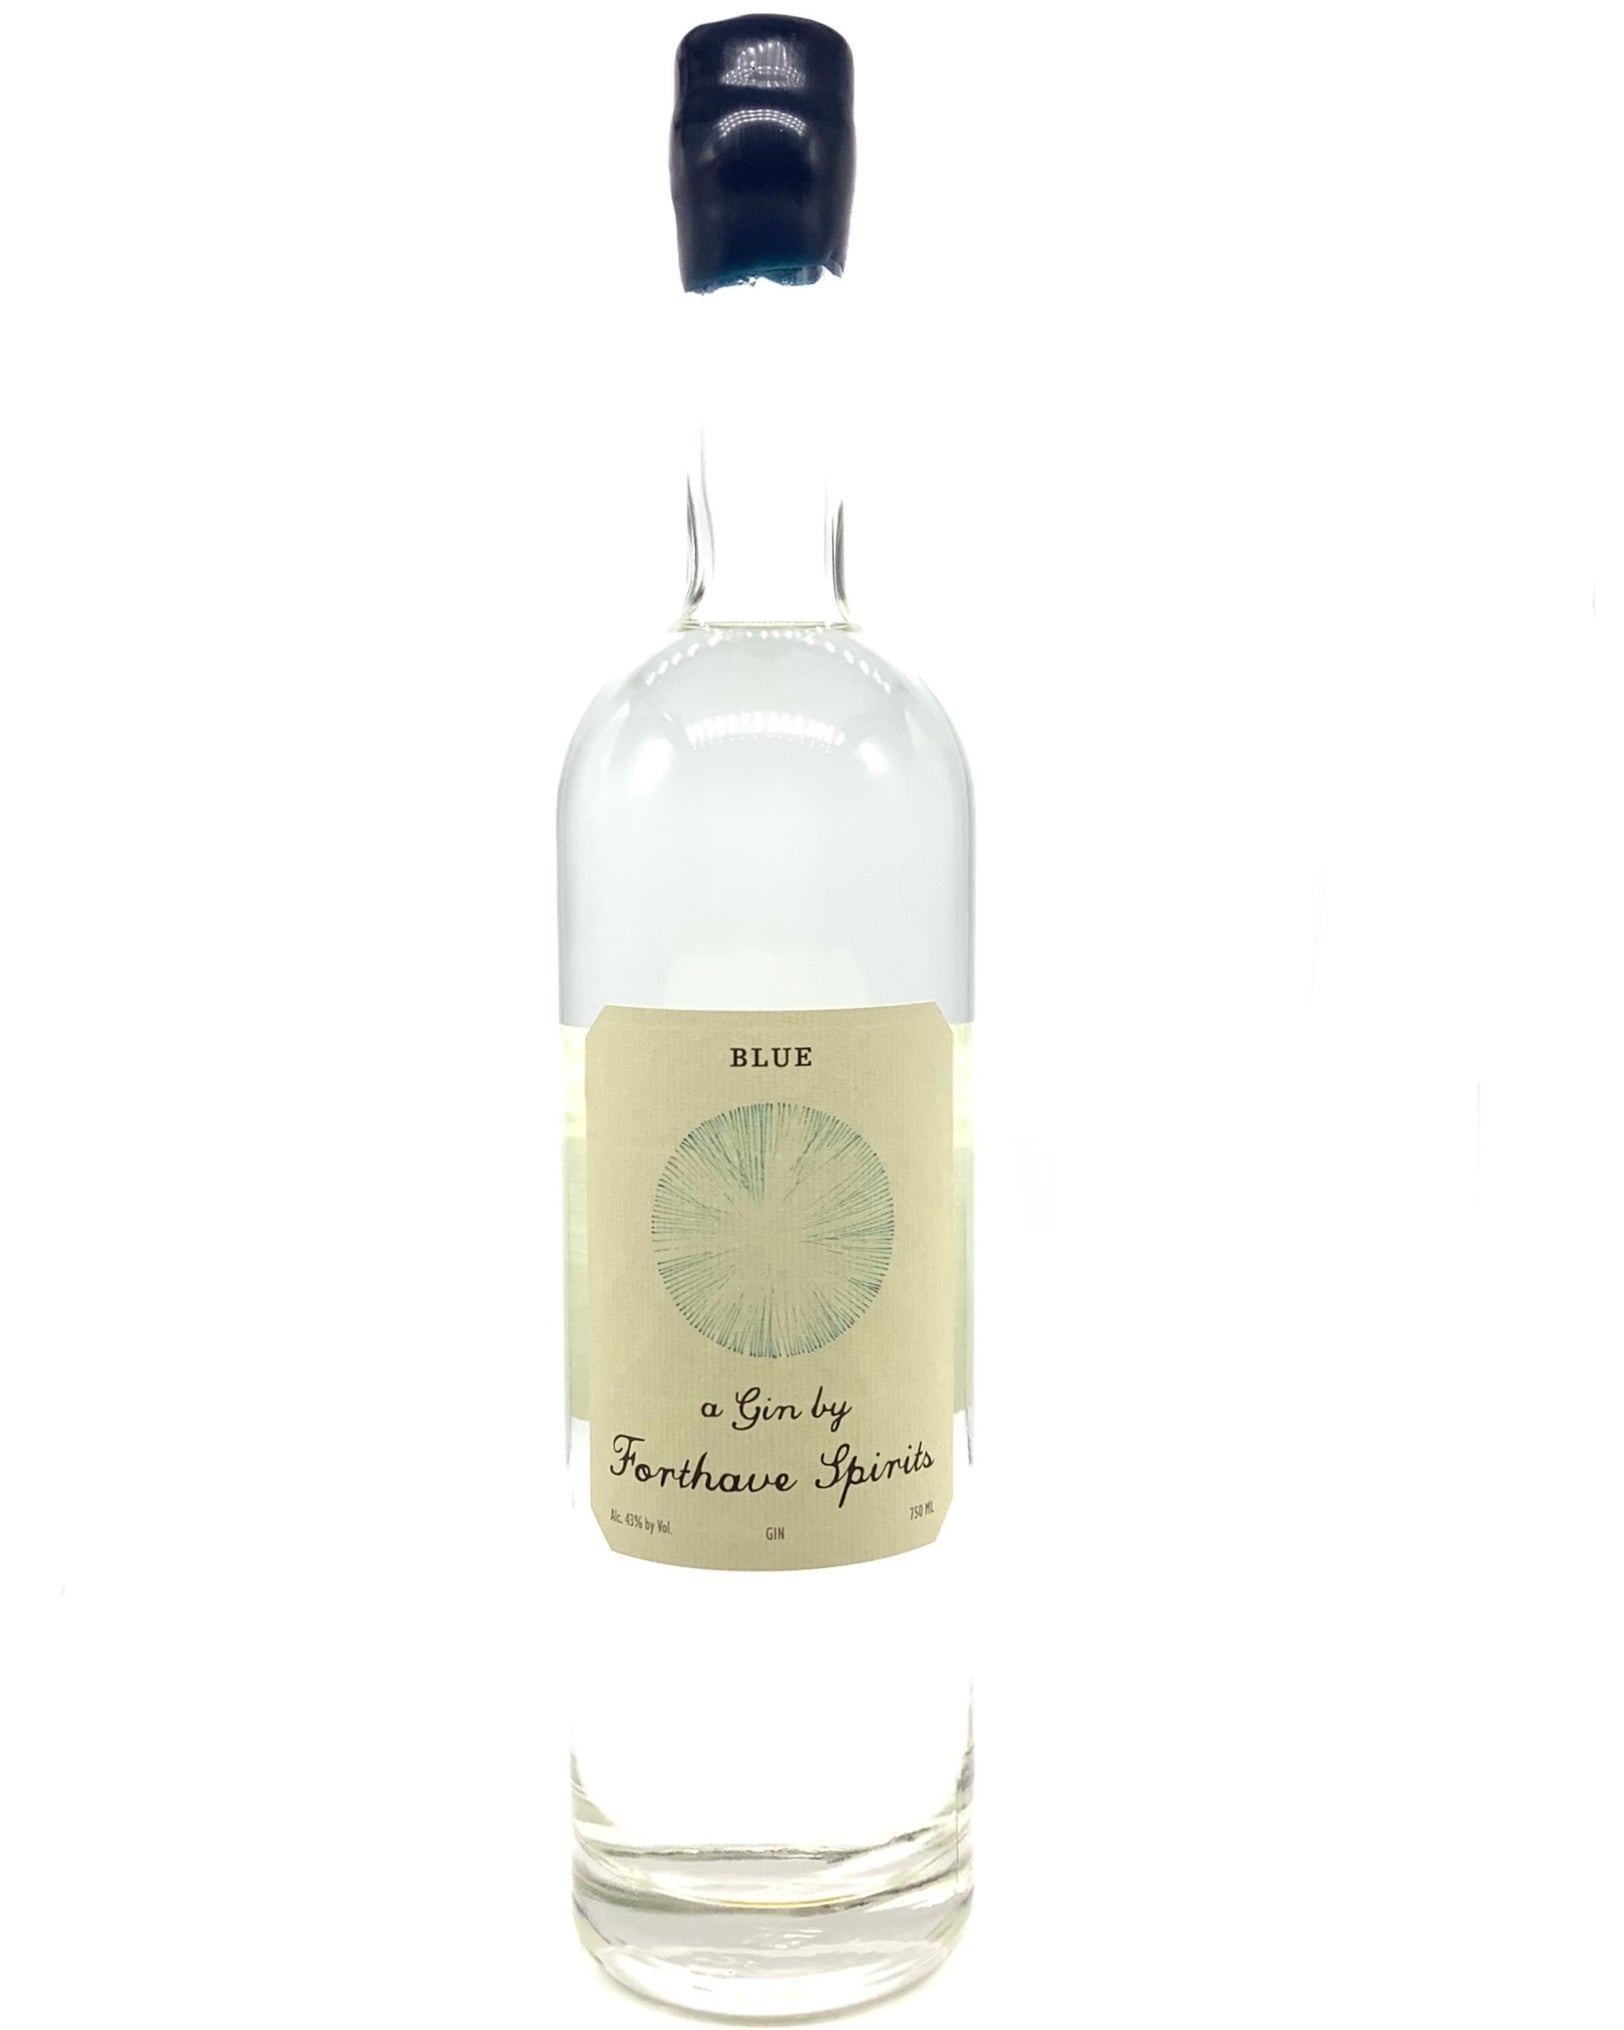 Forthave Spirits "Blue" Gin 750ml